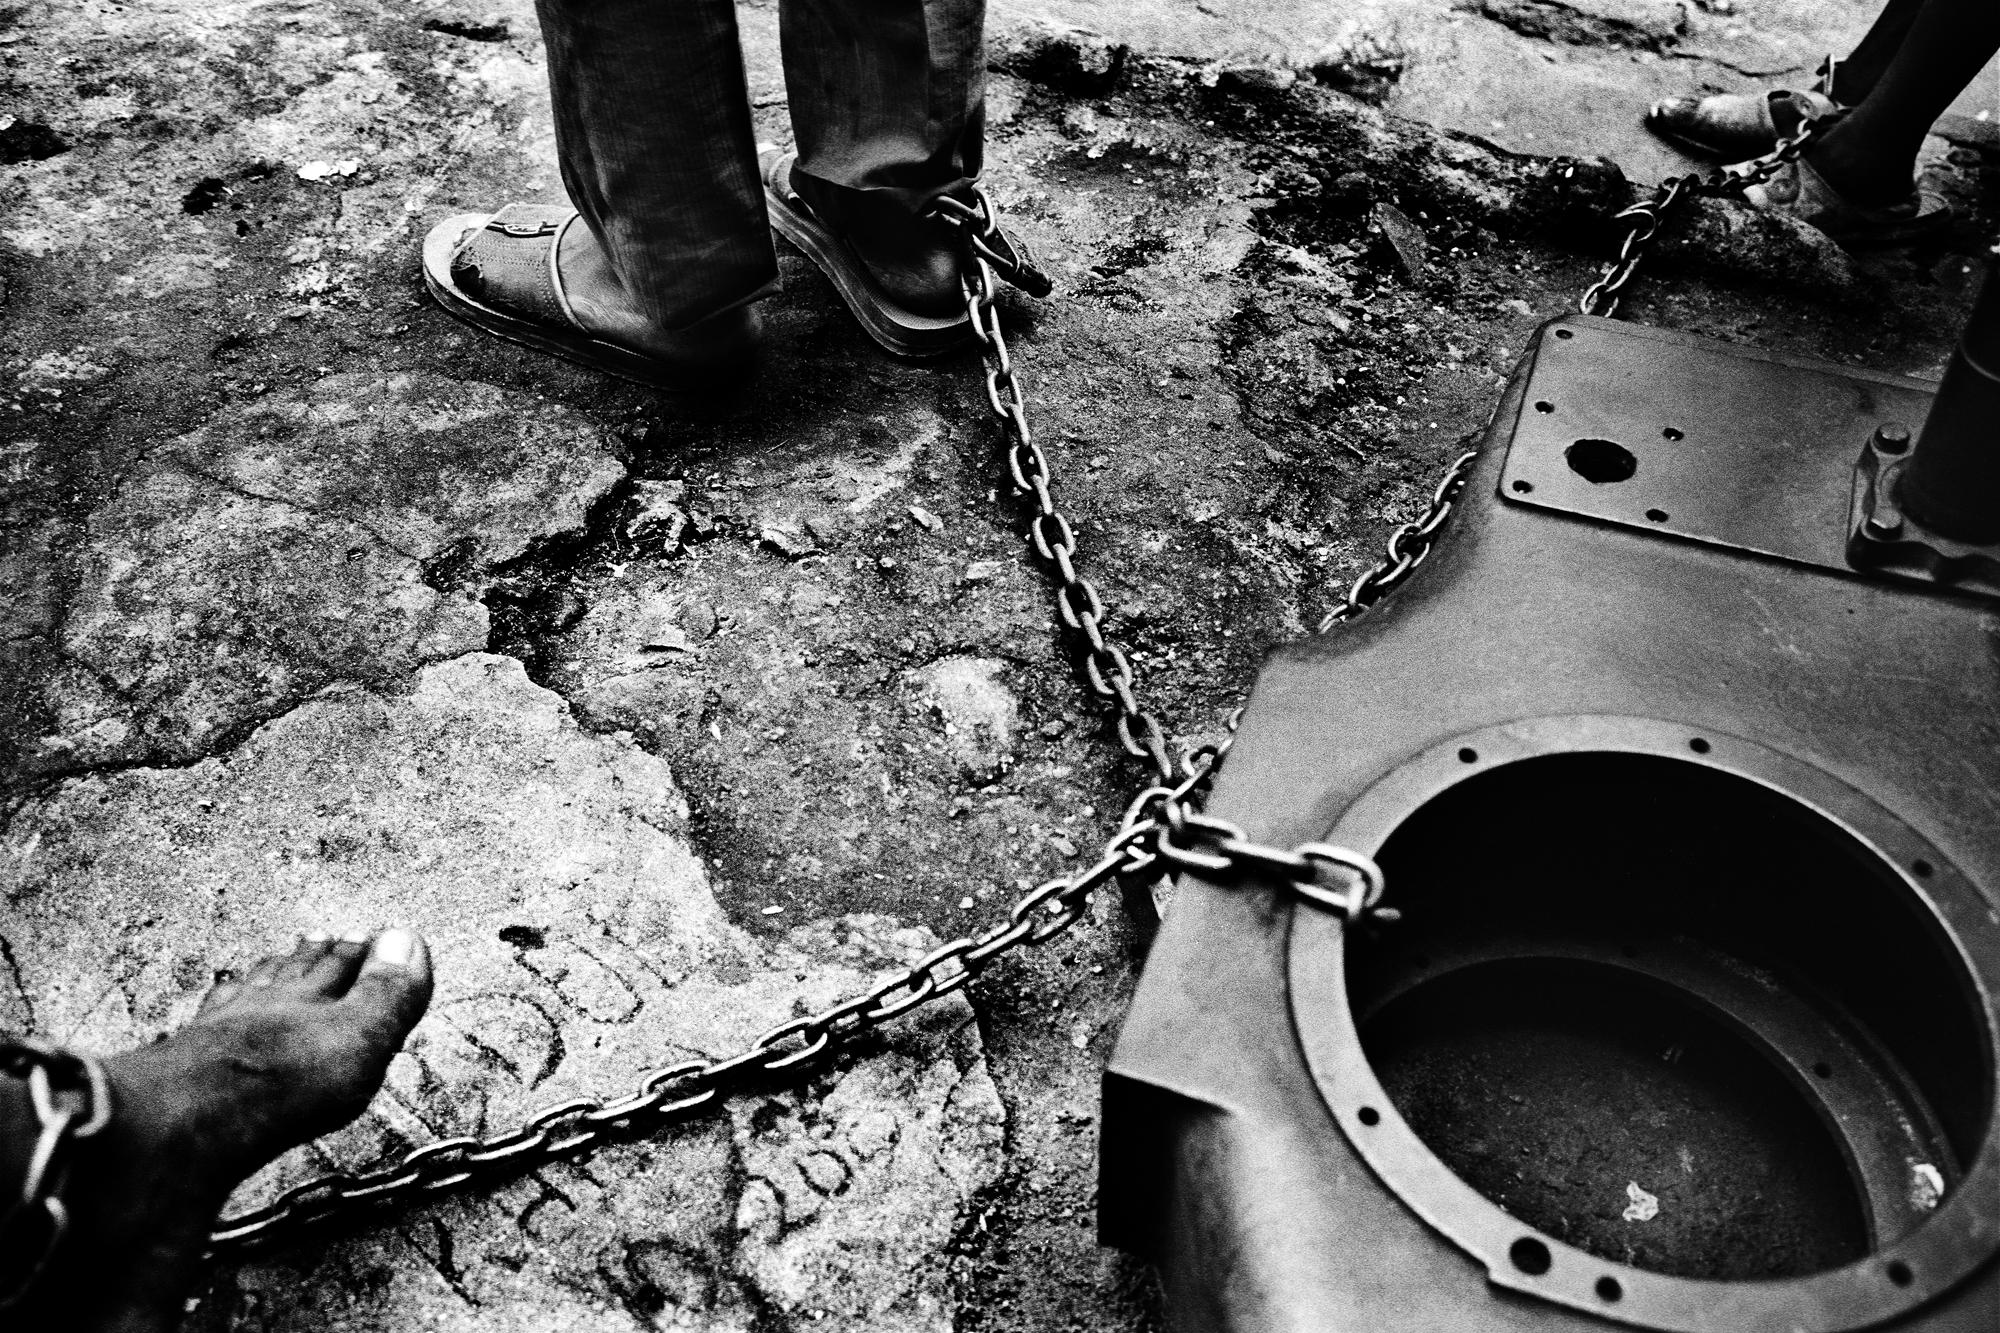 City of rest - SIERRA LEONE Freetown. August 2007. Chained inmates at...